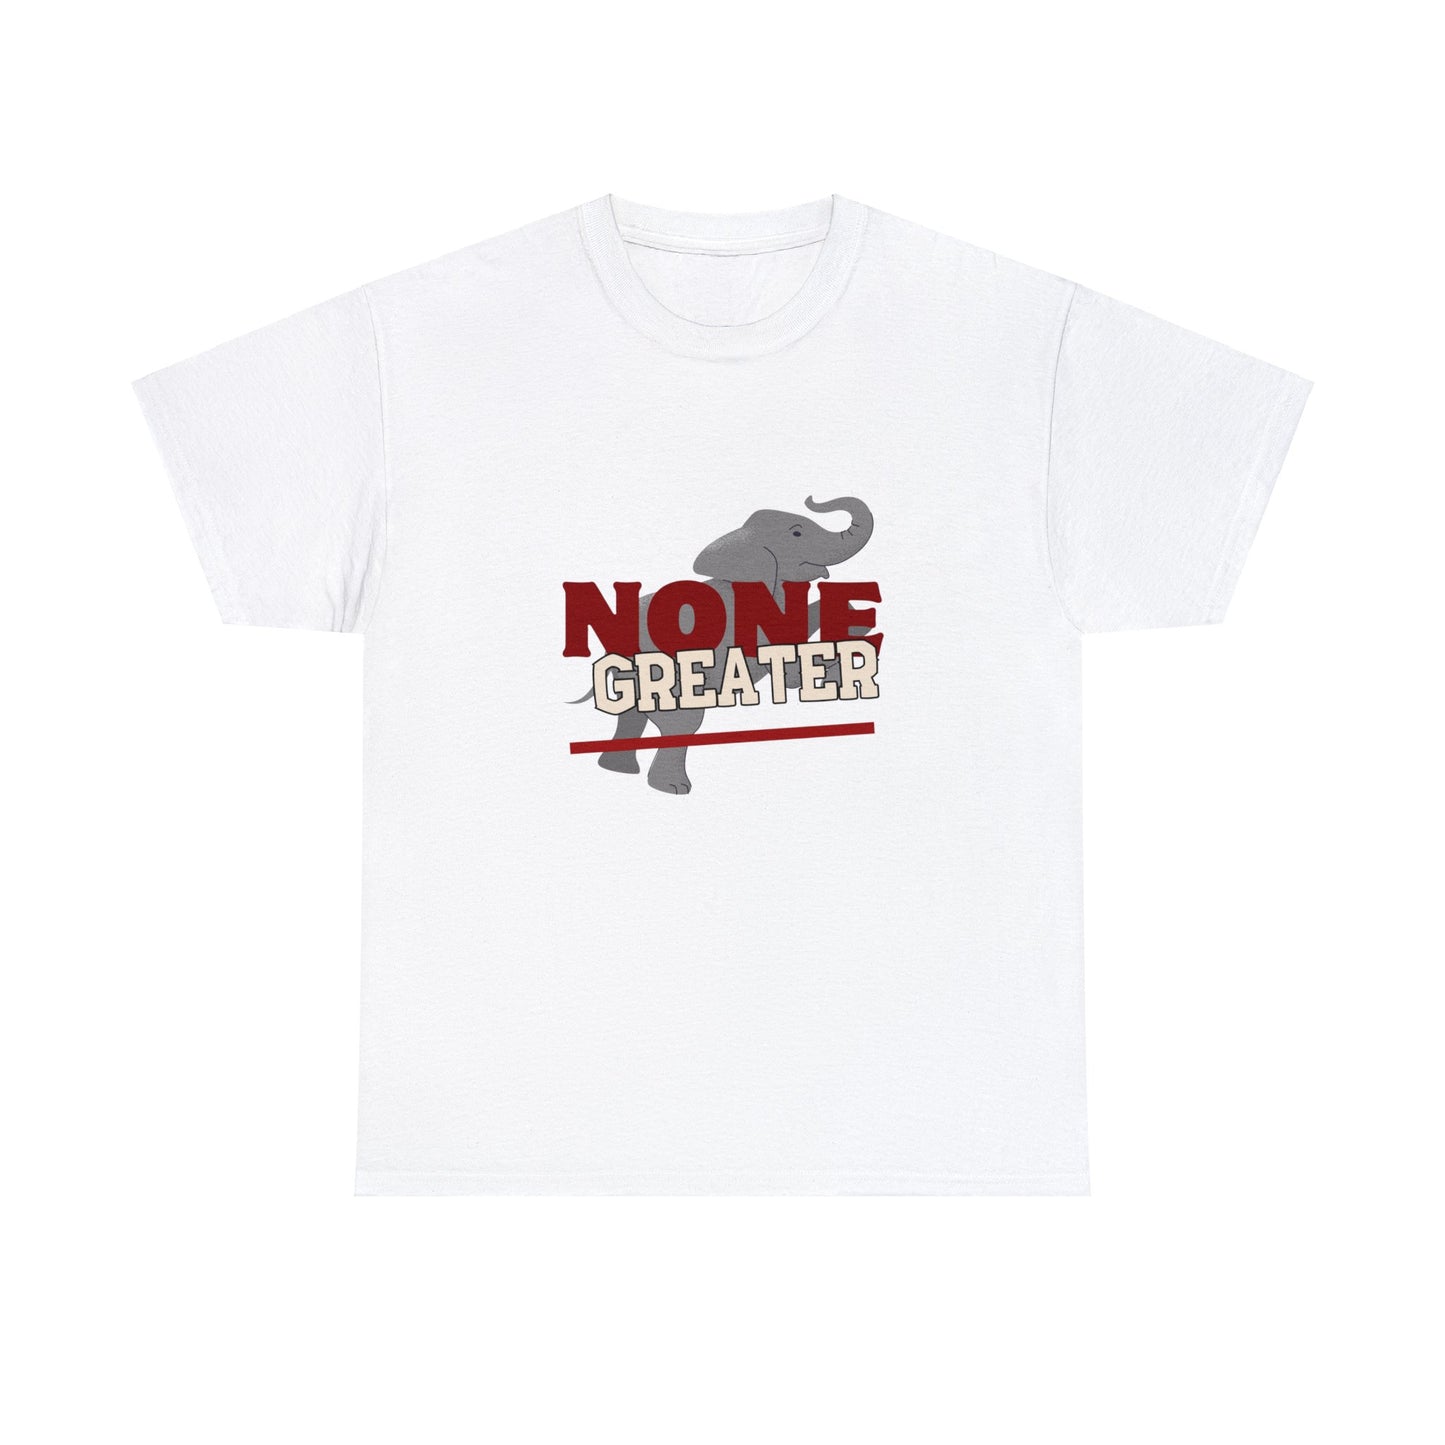 White Unisex Heavy Cotton Tee w/saying "None Greater" with Grey Elephant in background